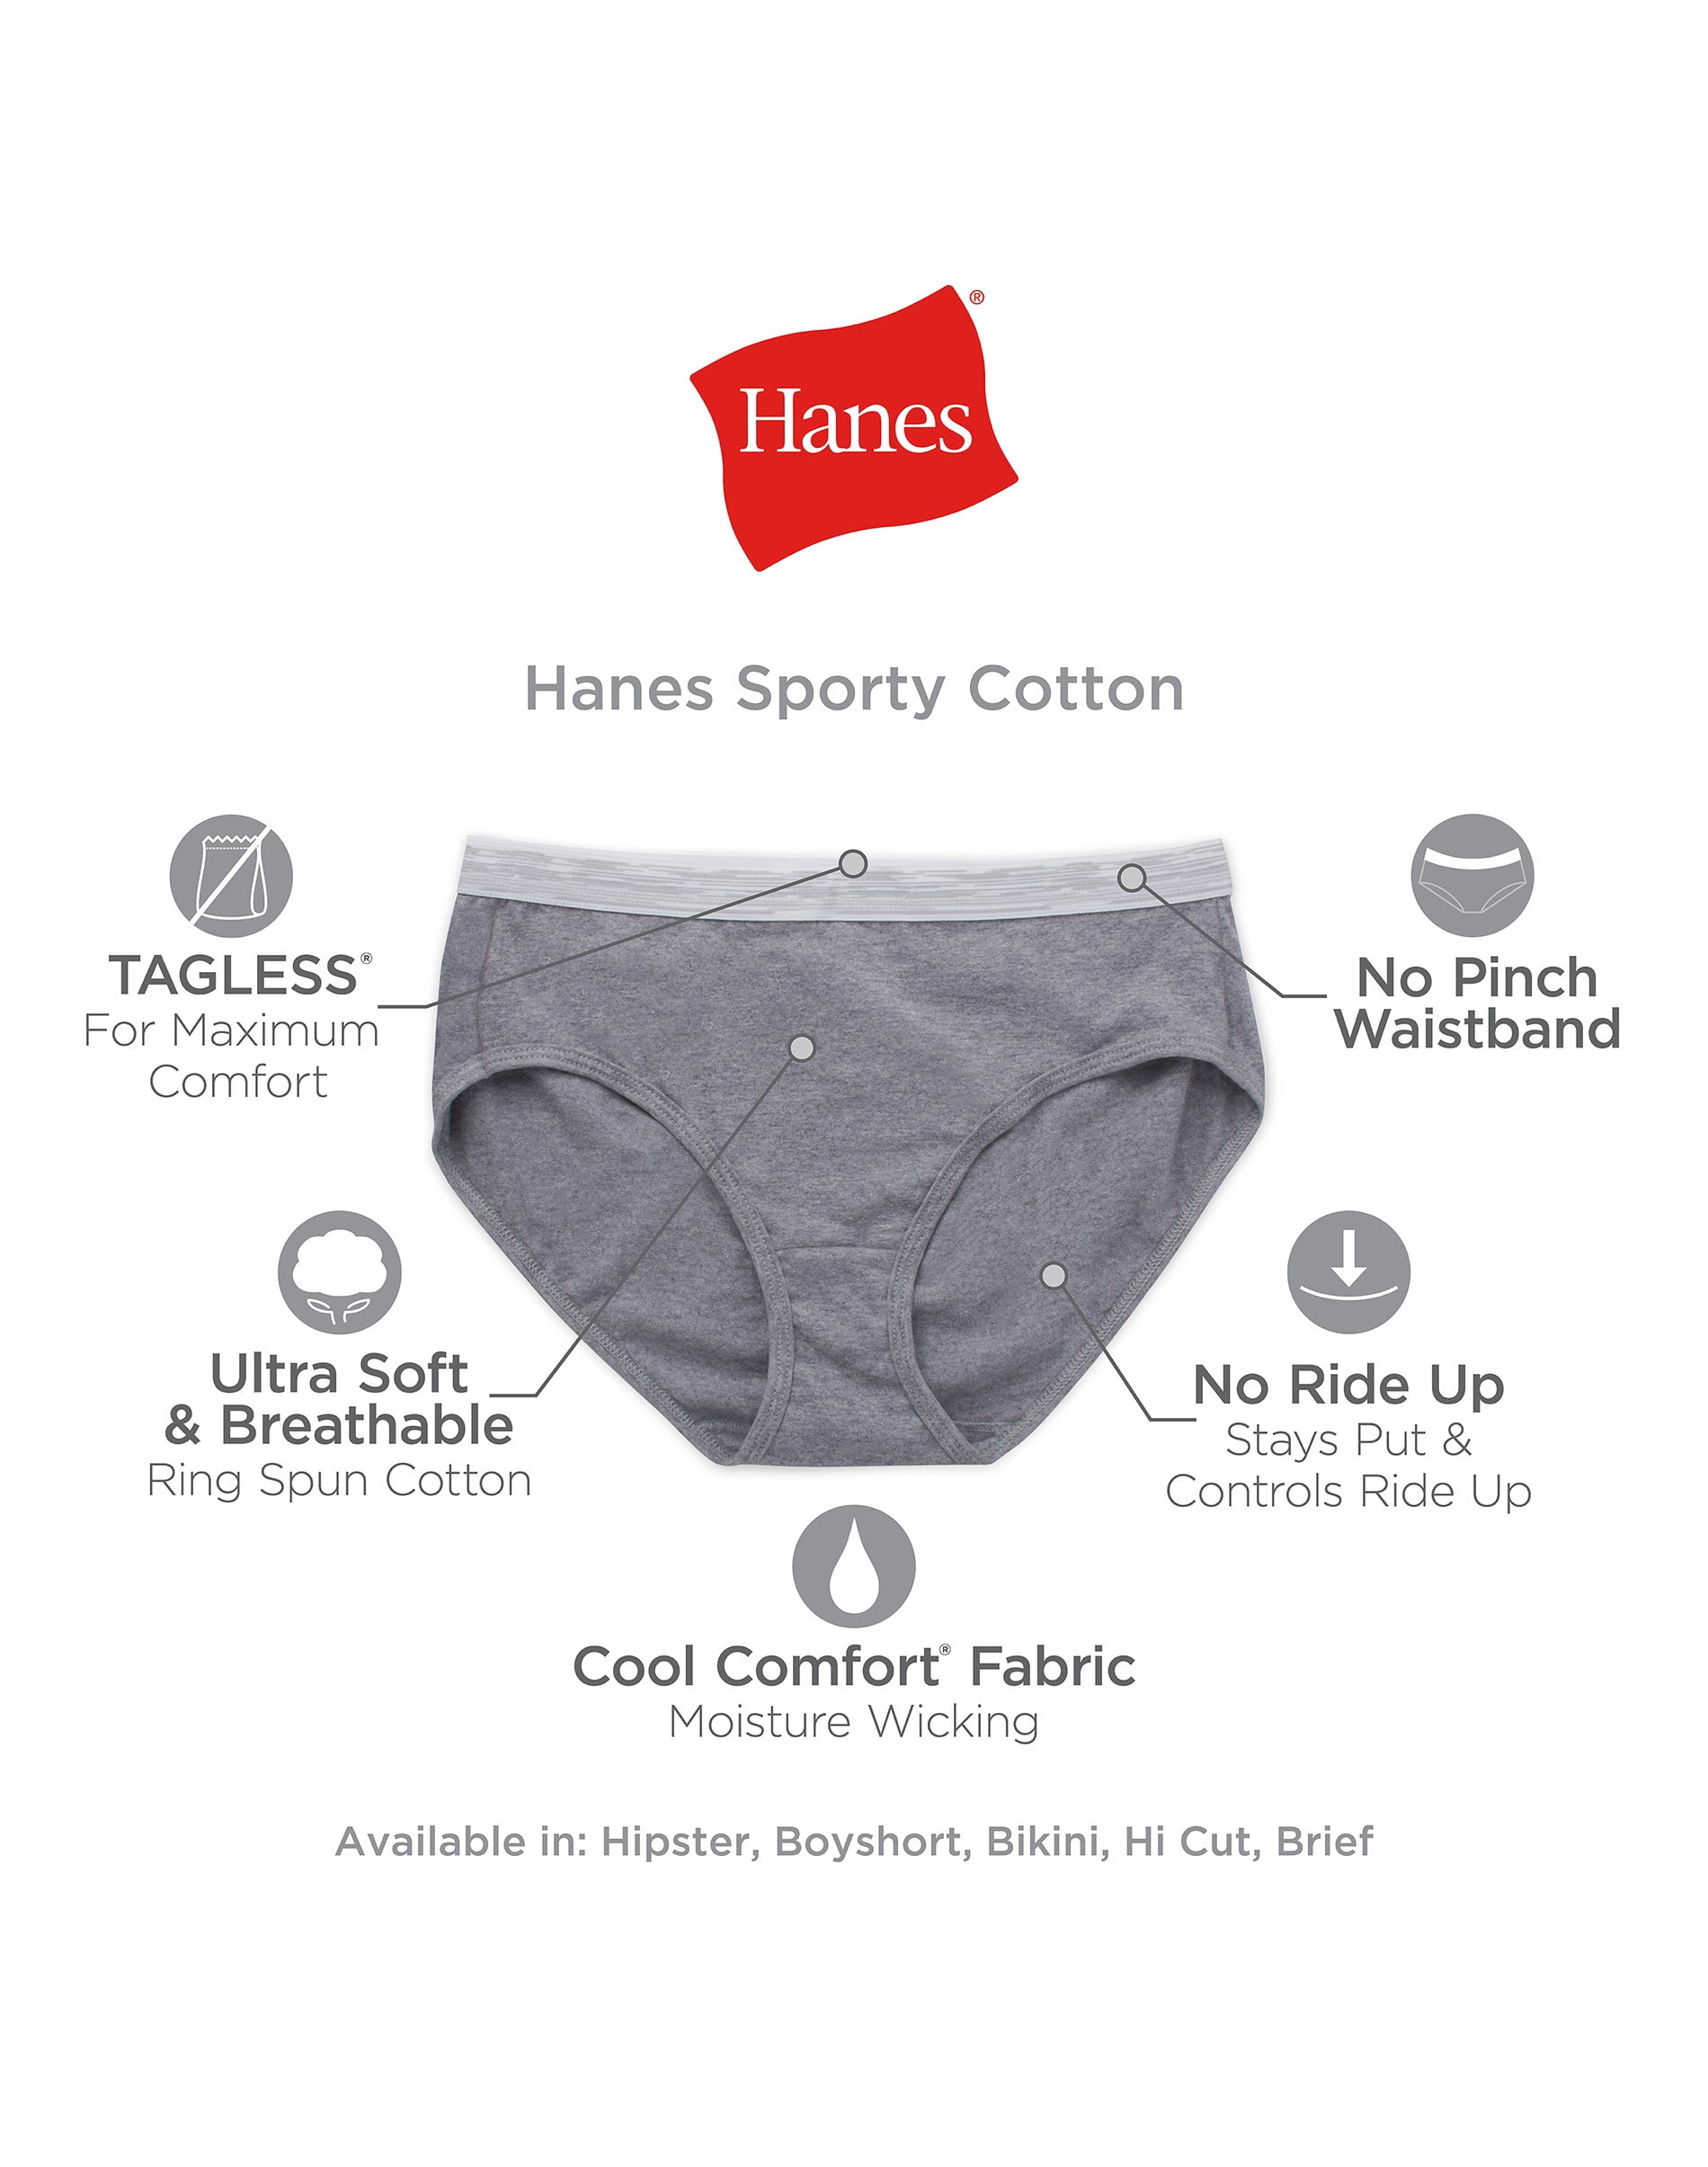 Hanes Women's 6-Pack Ribbed Cotton Hipster Underwear UK